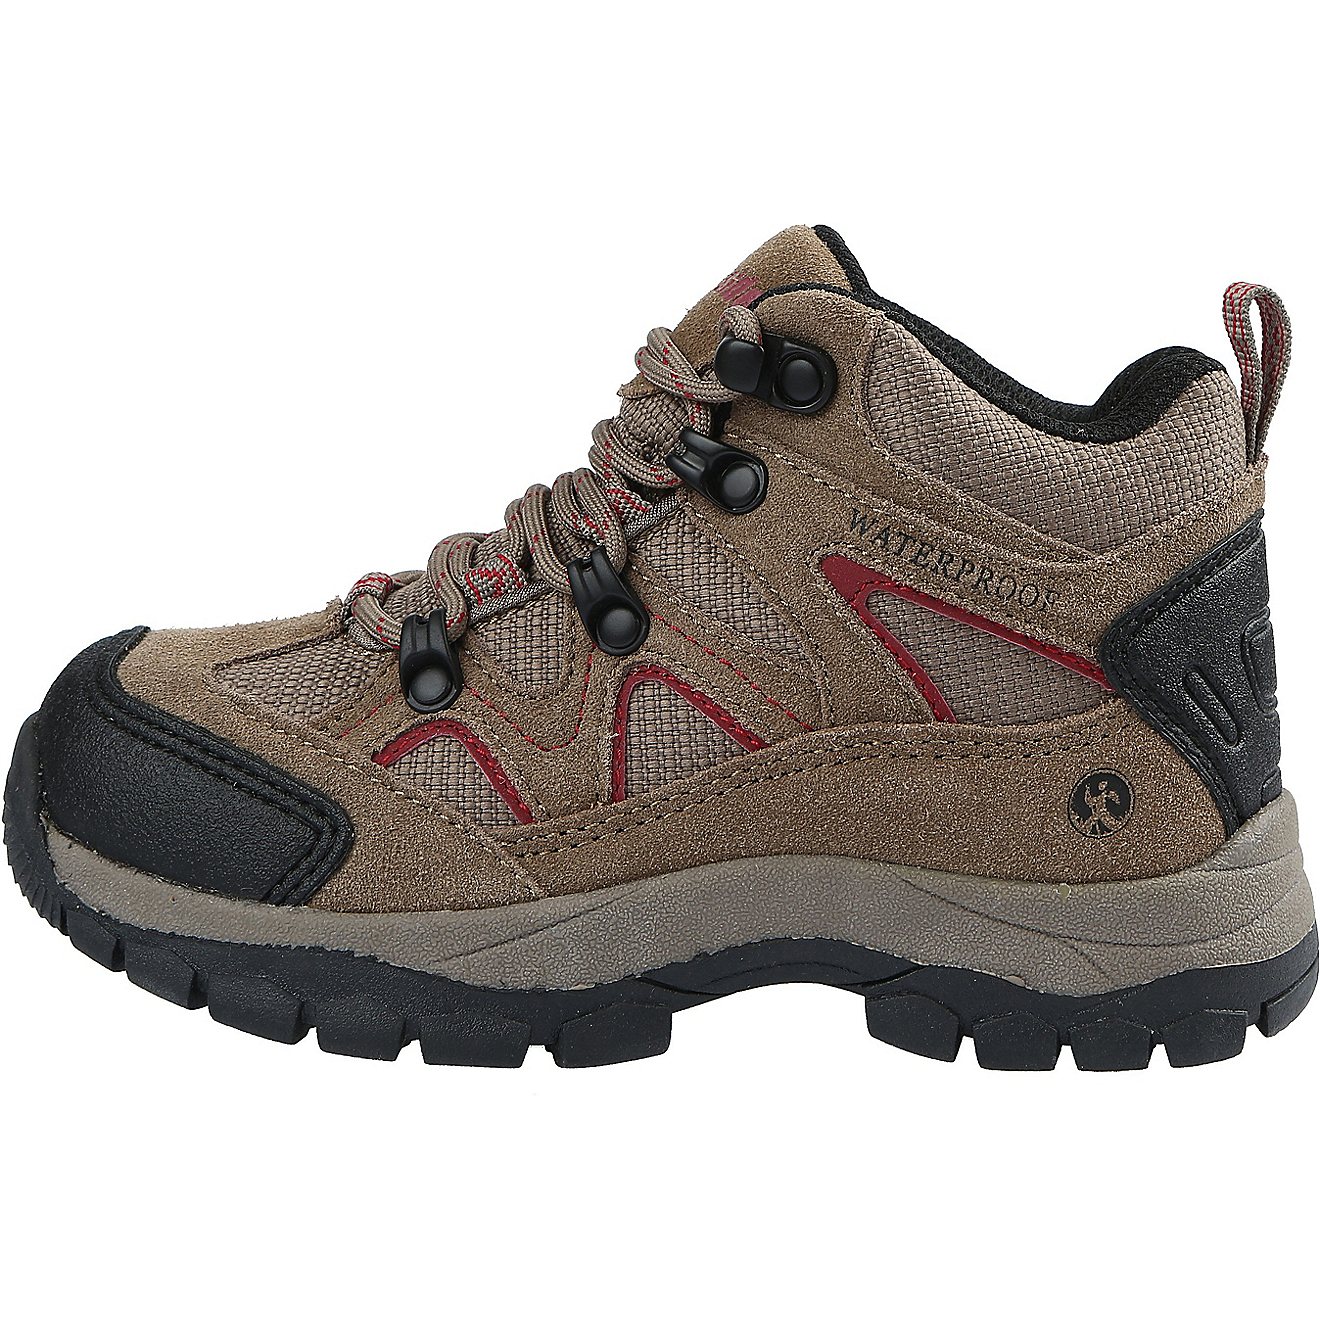 Northside Kids' 4-7 Snohomish Waterproof Hiking Boots                                                                            - view number 1